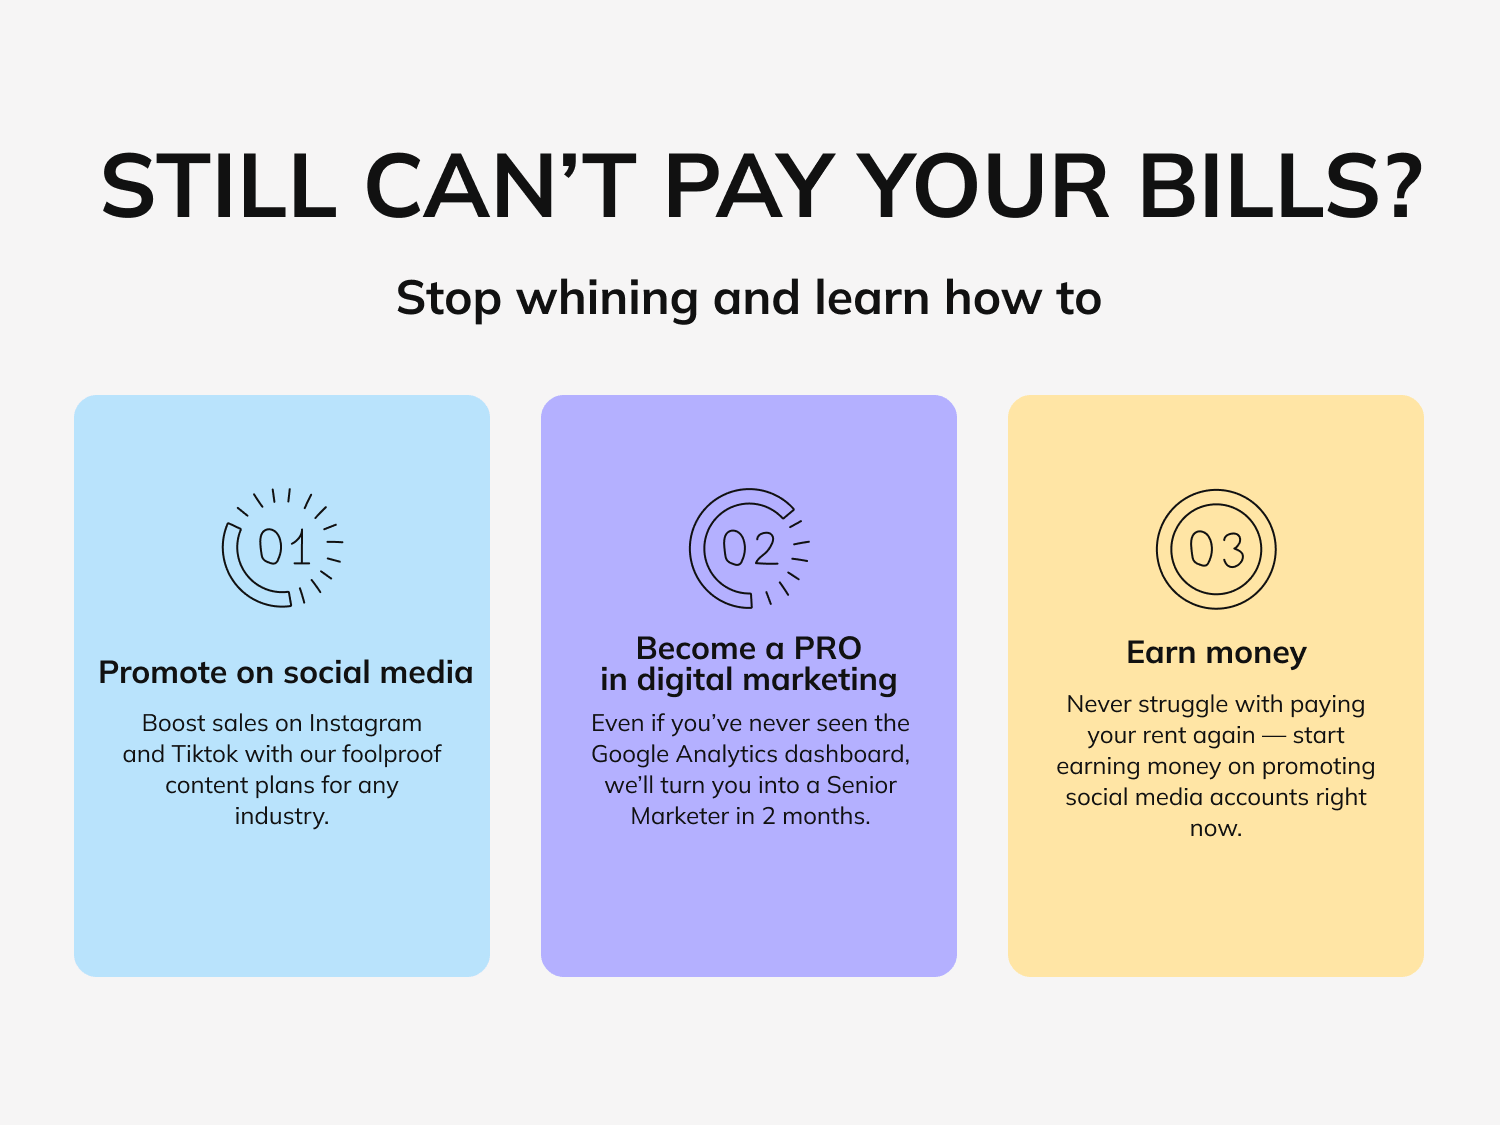 The online course landing page that says “Still can’t pay your bills? Stop whining and learn how to 1. Promote on social media with our foolproof content plans. 2. Become a PRO in marketing in 2 months. 3. Earn money right now and never struggle with paying your rent again.” The page has a spelling mistake: “Tiktok”.